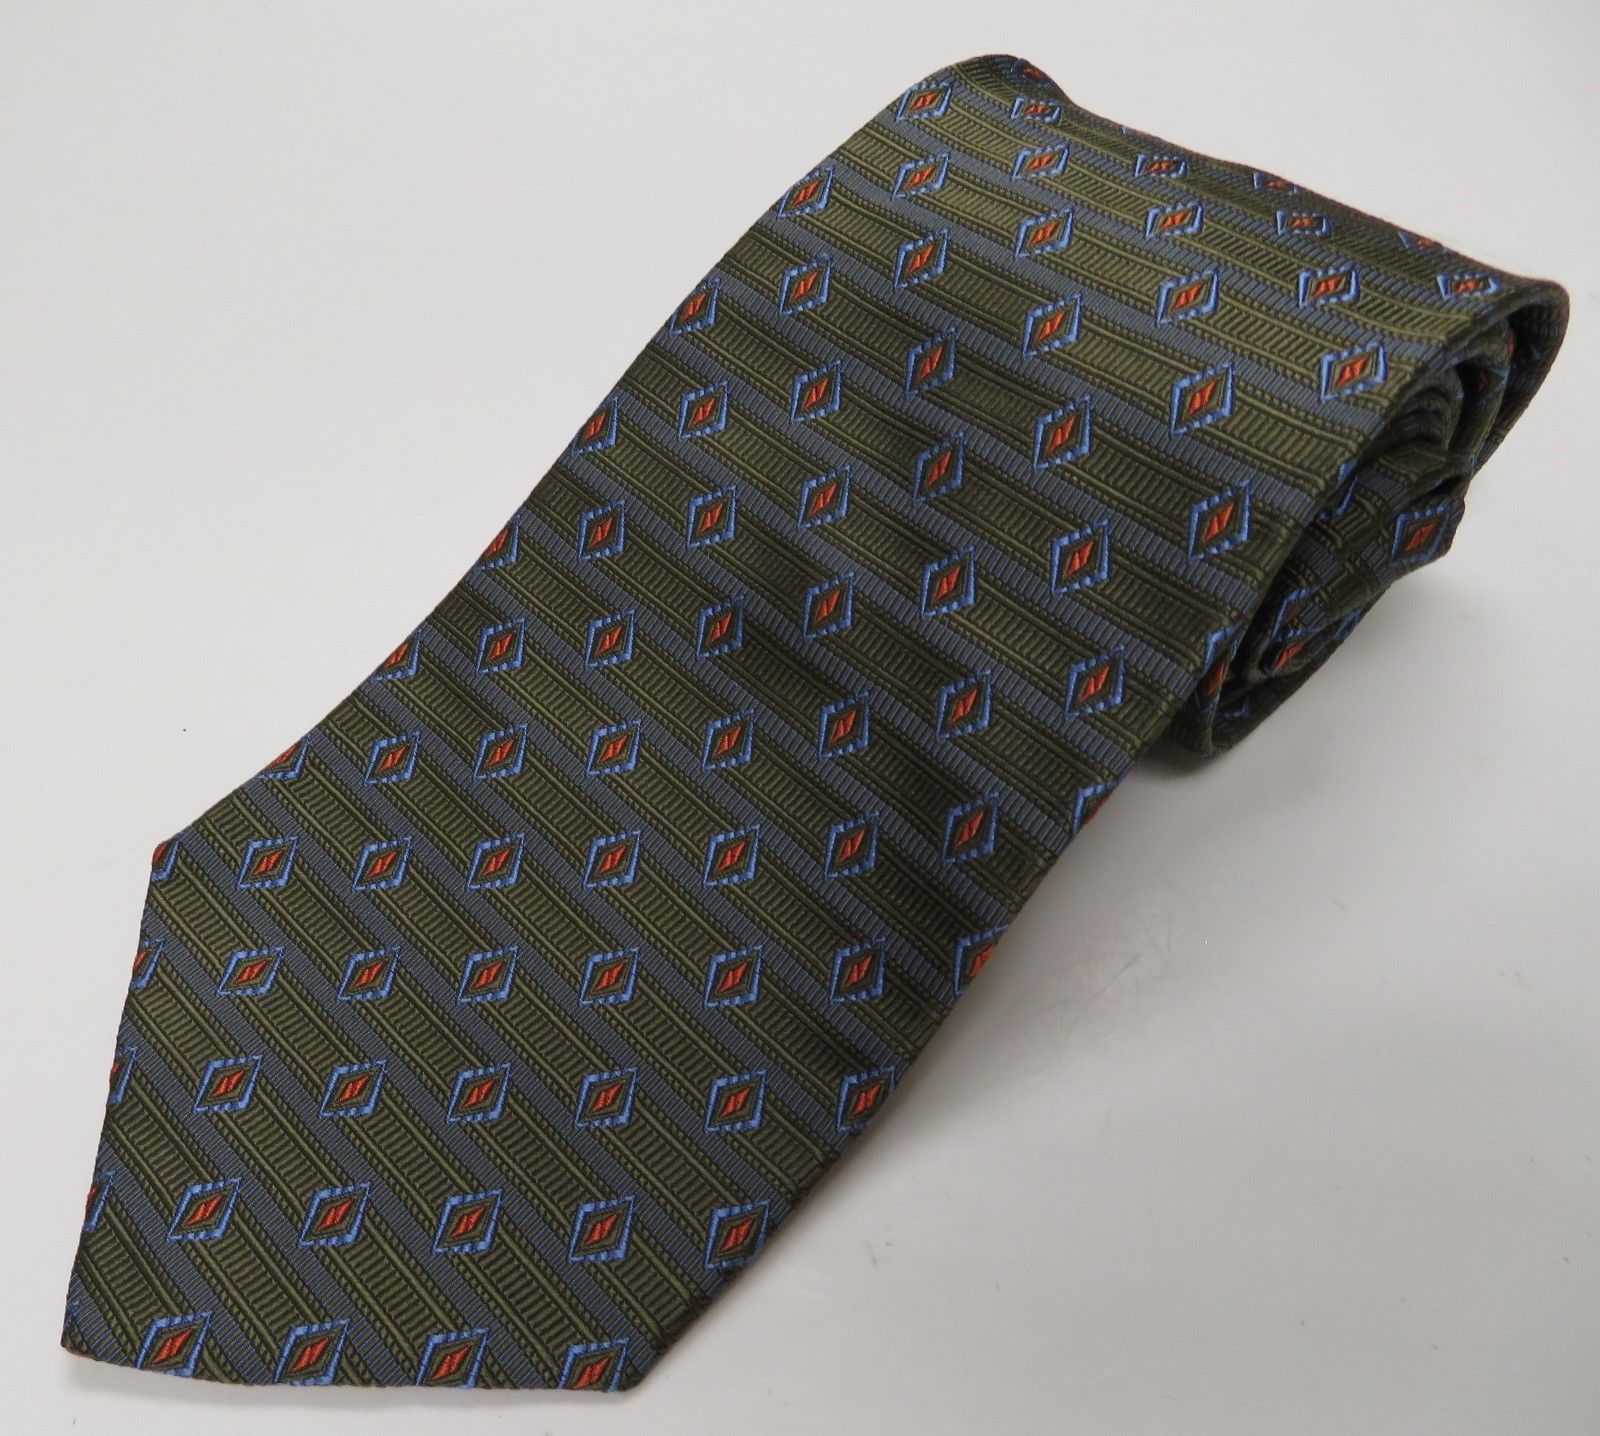 Jos A Bank Green Silk Tie Wide 4" Made in Italy - $4.99